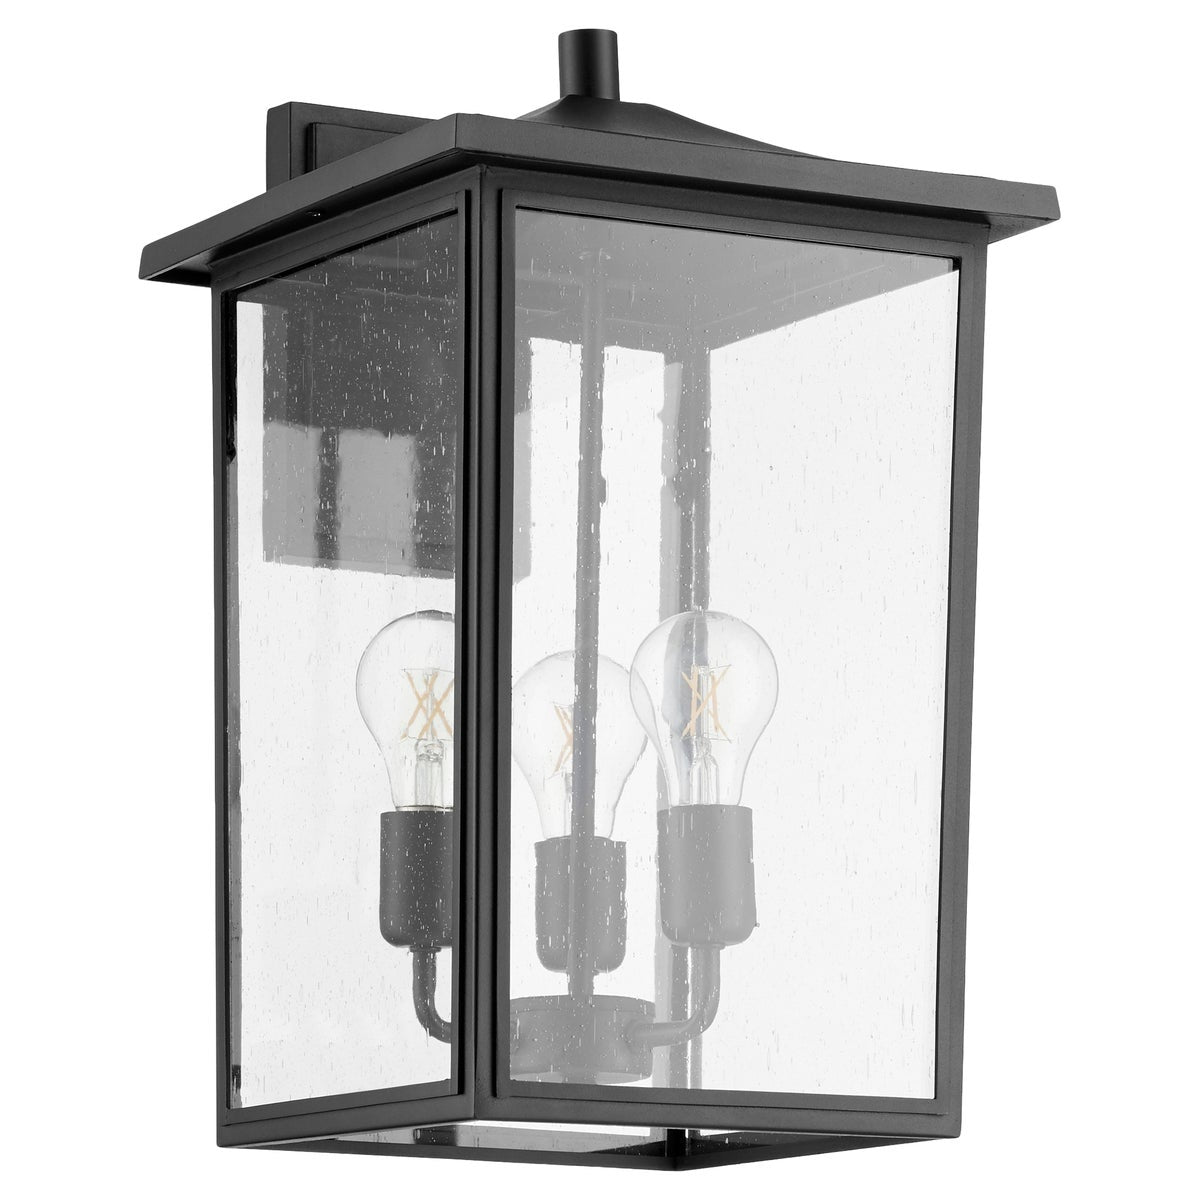 Farmhouse outdoor wall light with clear-seeded glass enclosure and three 60W medium base light sources. Adds classic touch and cozy appeal to your outdoor ensemble.